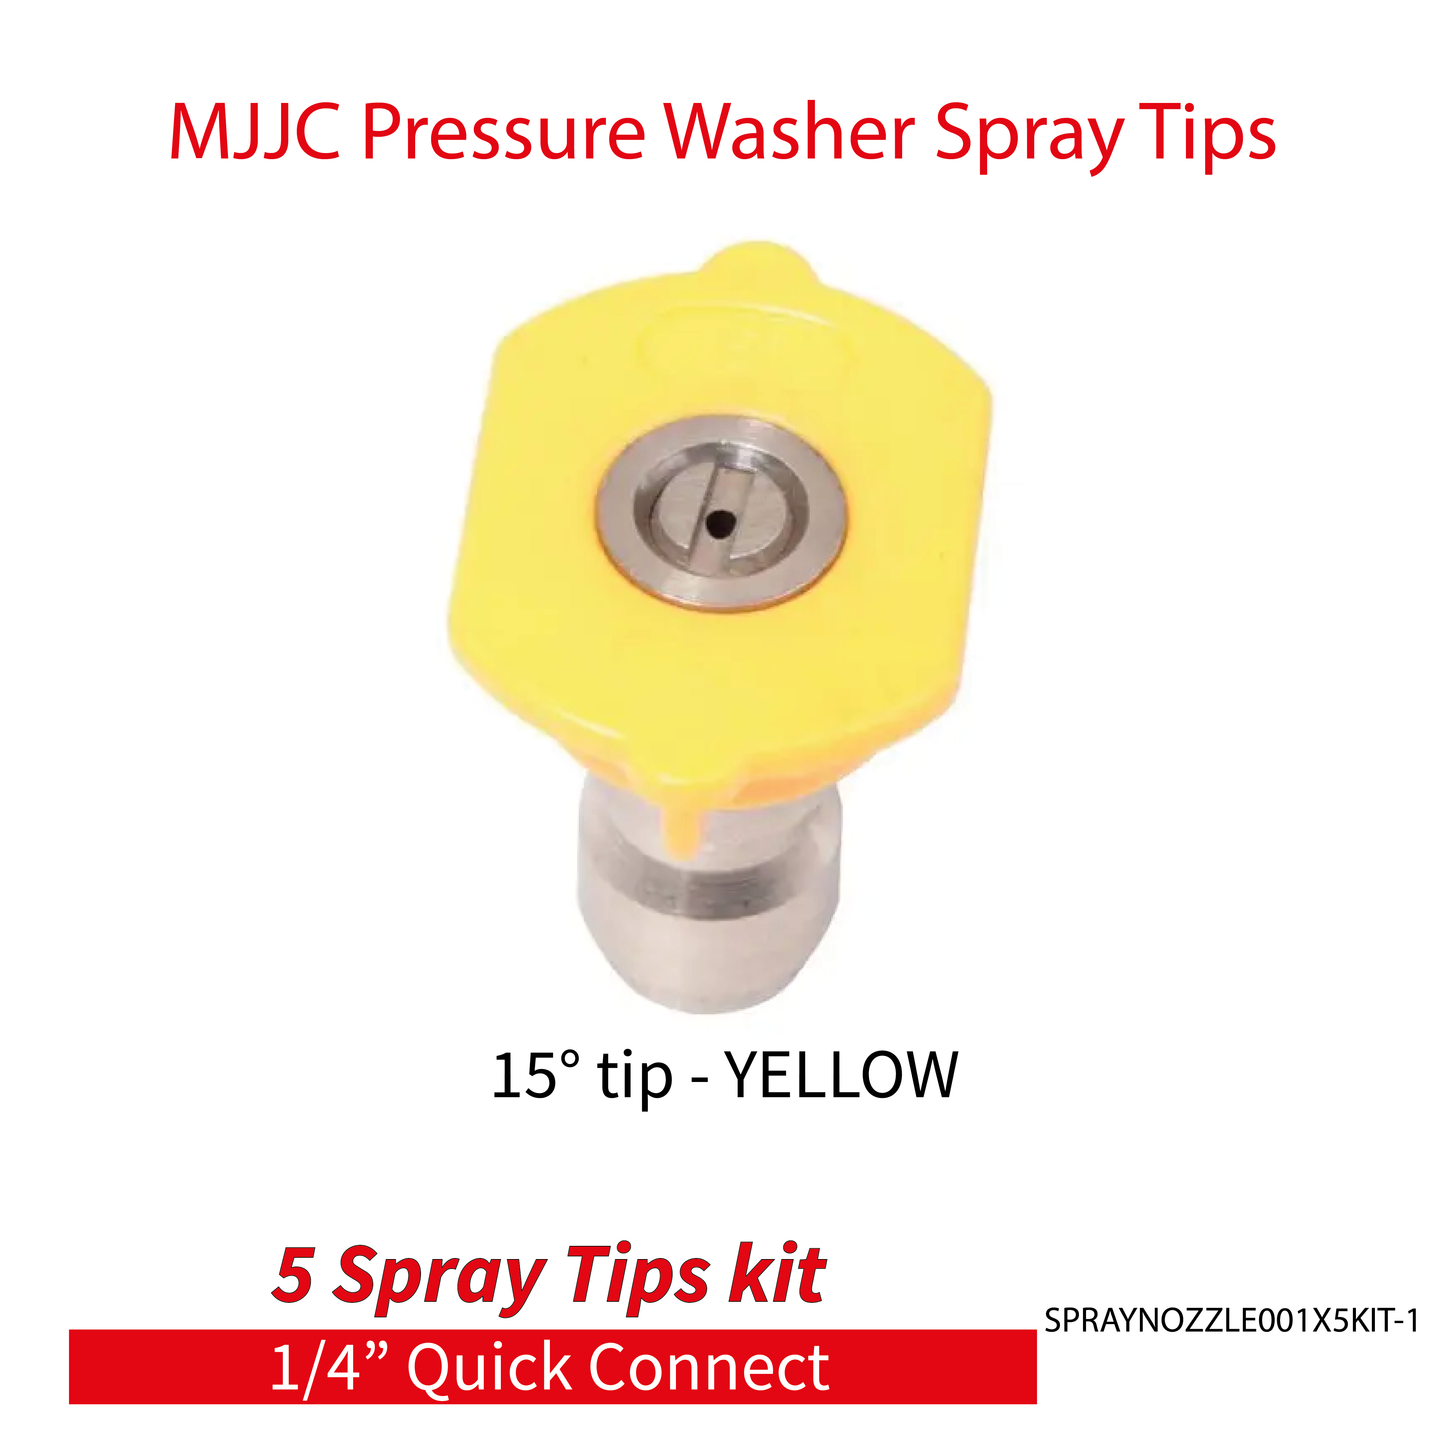 MJJC Pressure Washer Spray Tips (5 tips) Universal 1/4" Quick Connect